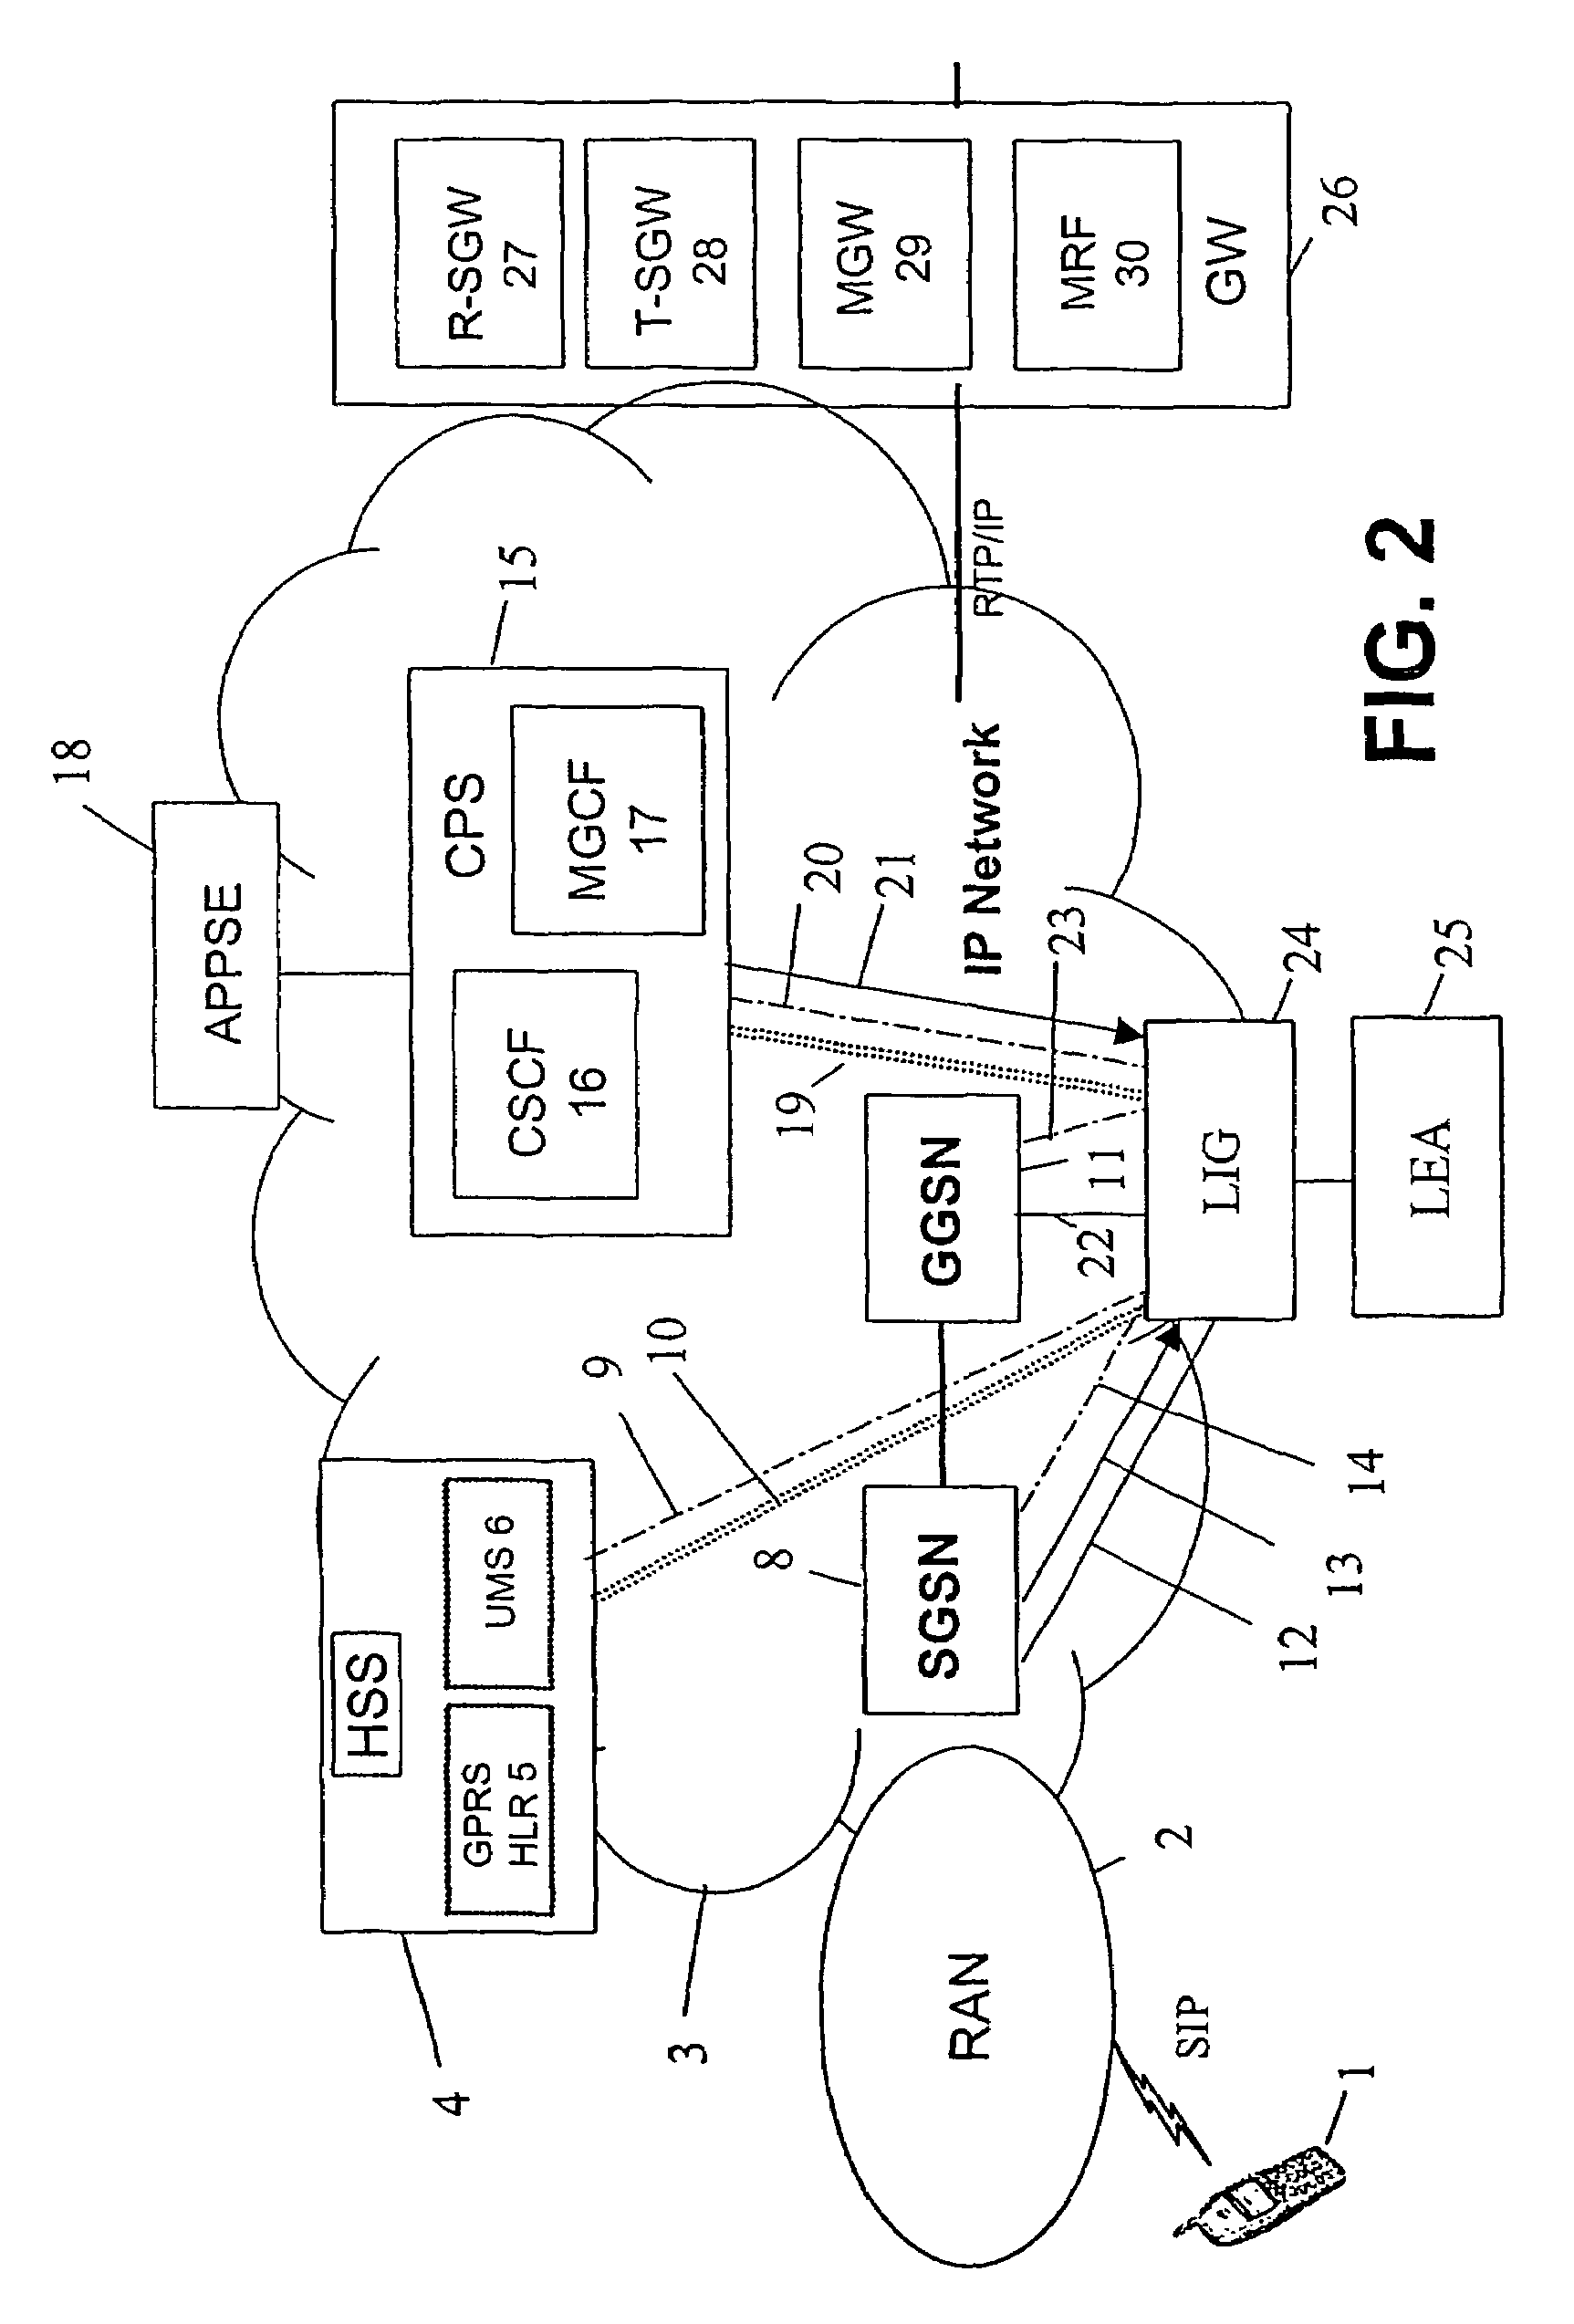 Method and system allowing lawful interception of connections such as voice-over-internet protocol calls